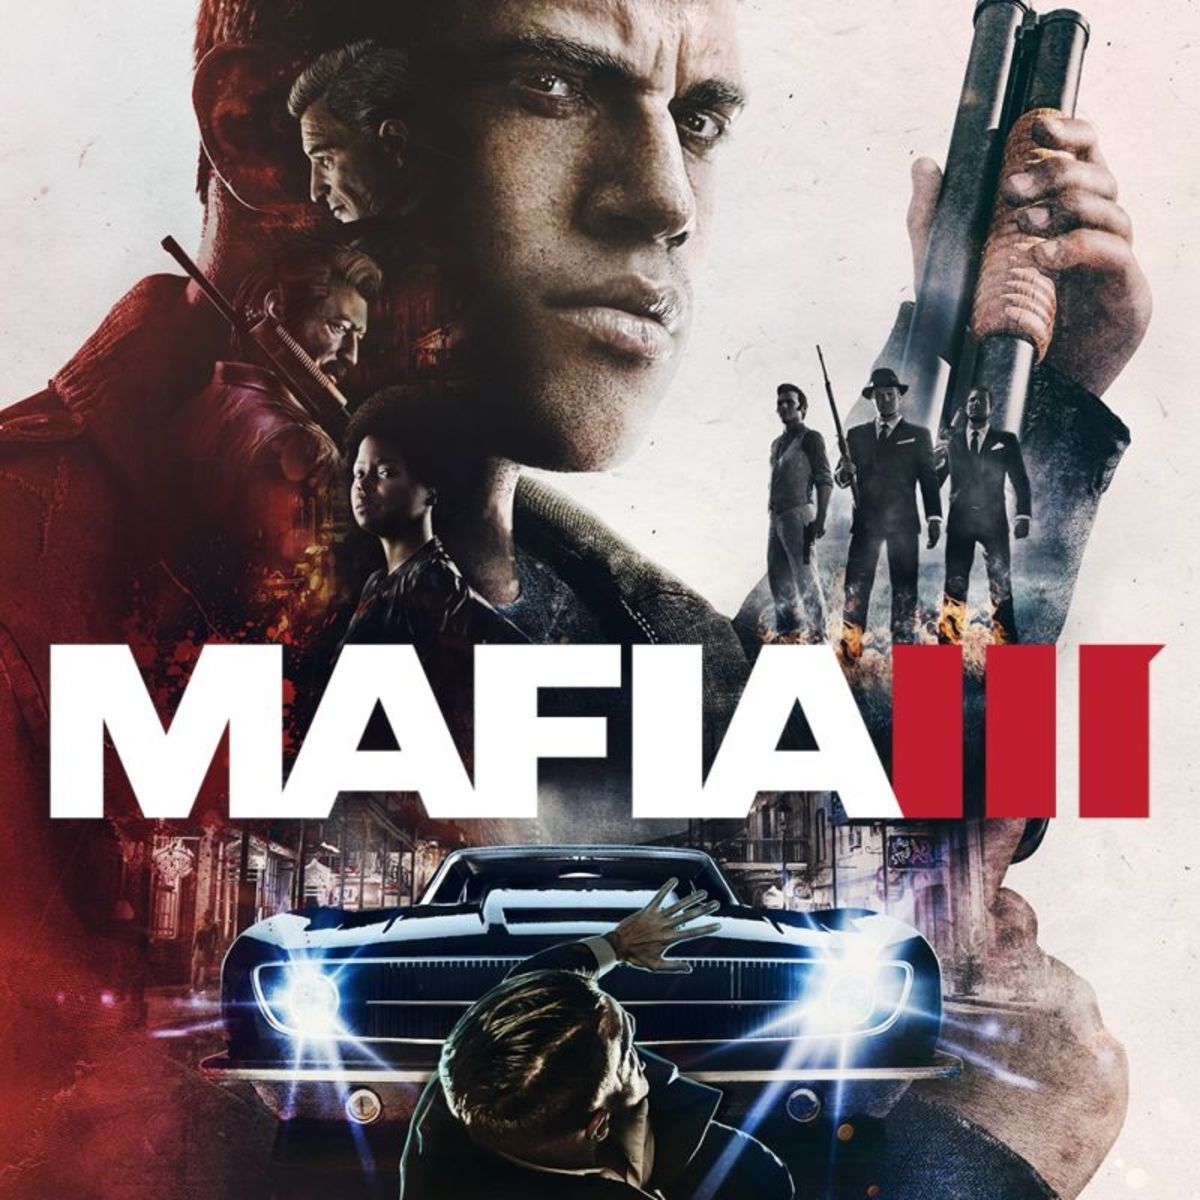 Mafia 3 Should Have Been Linear.